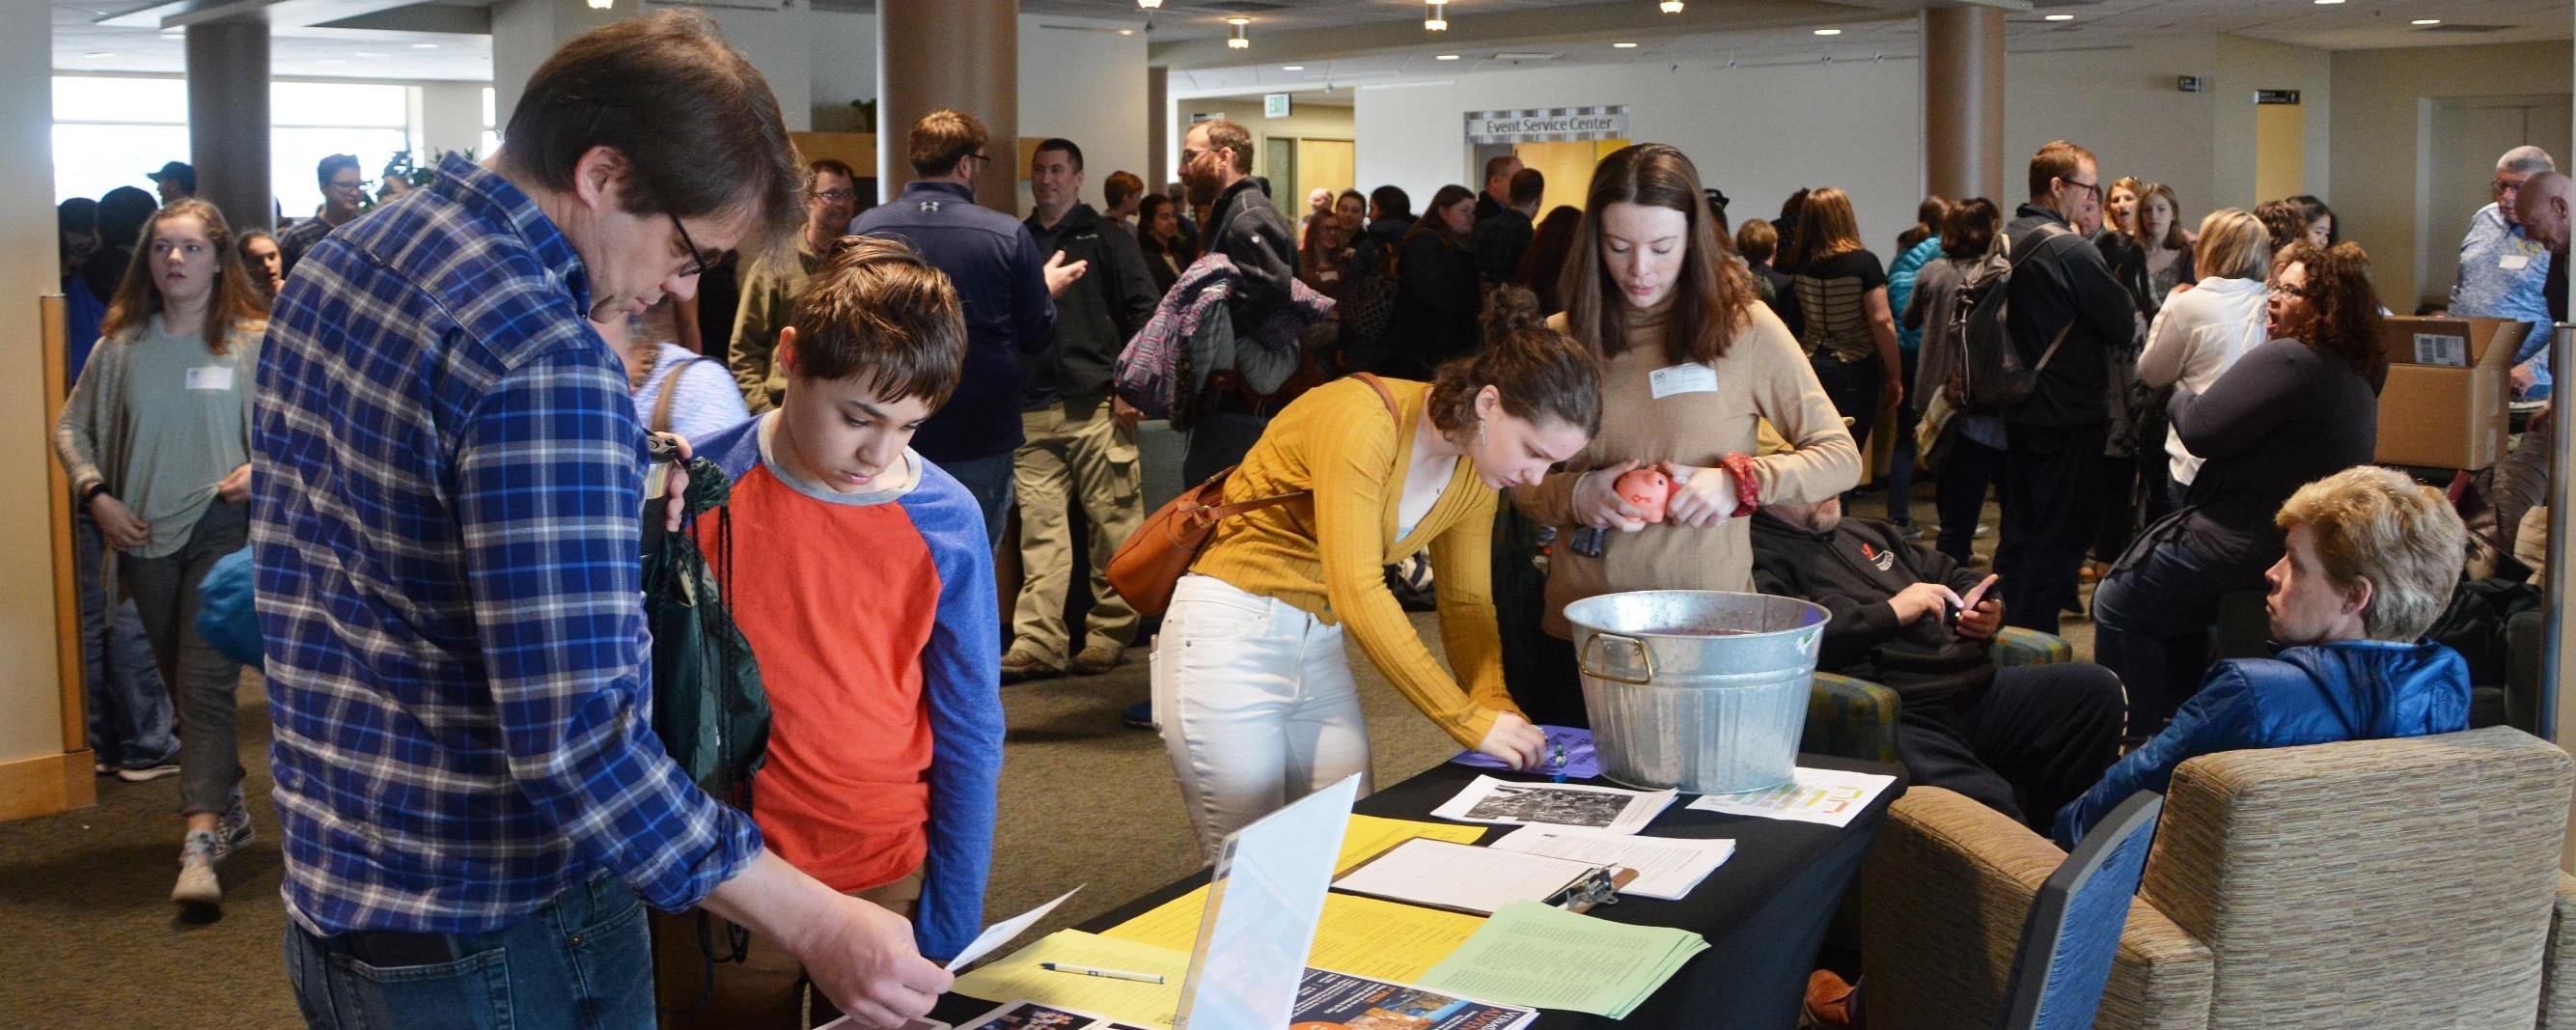 crowd of people near registration desk at Vermont History Day 2019